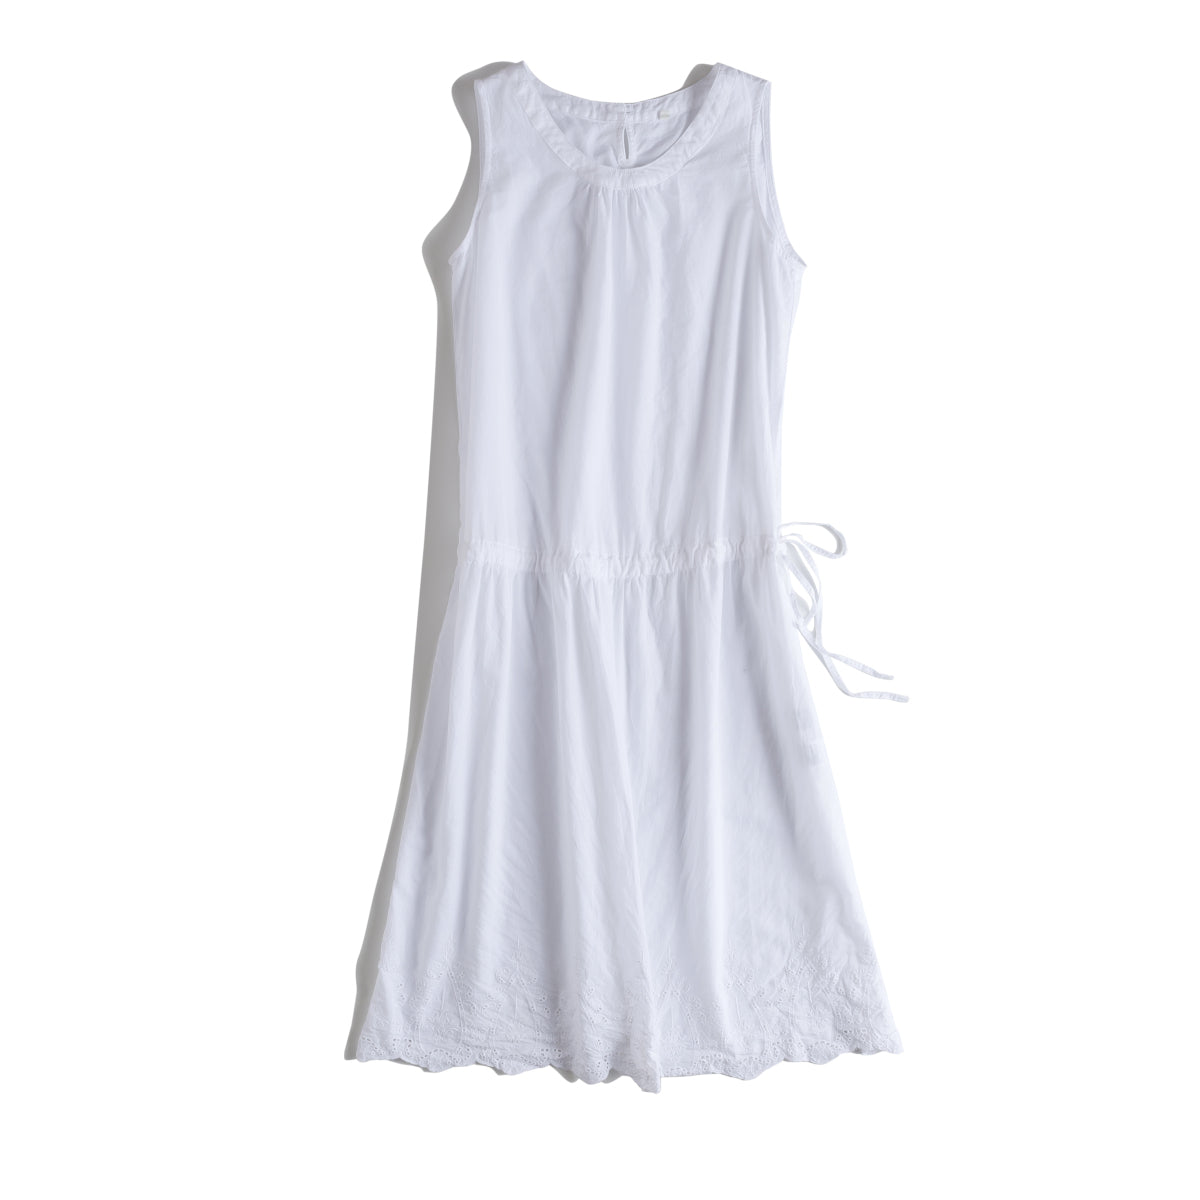 Women Casual Drawing Cotton Sundresses Summer Cool Clothes Q18063 ...